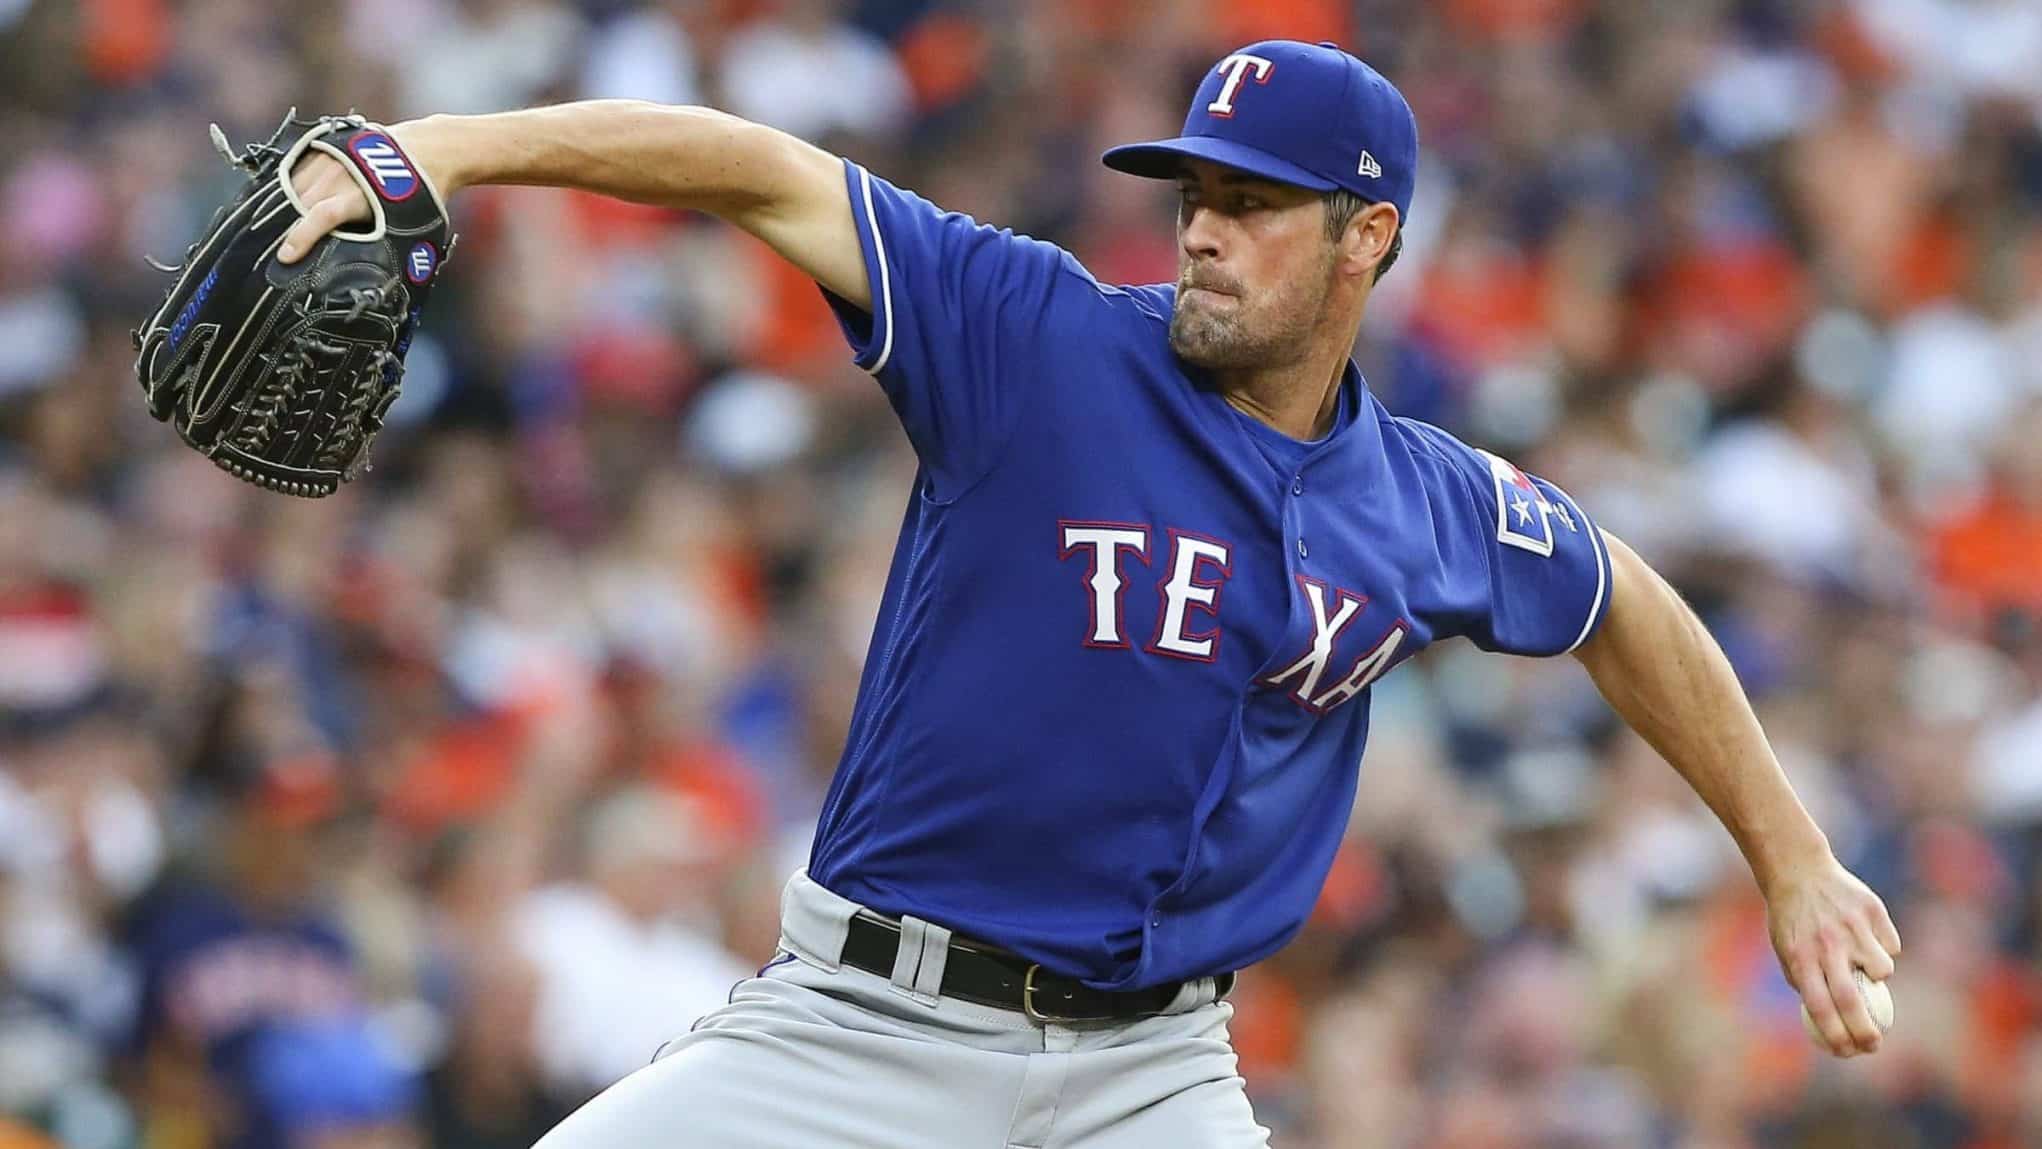 Is Cole Hamels headed to the Bronx?